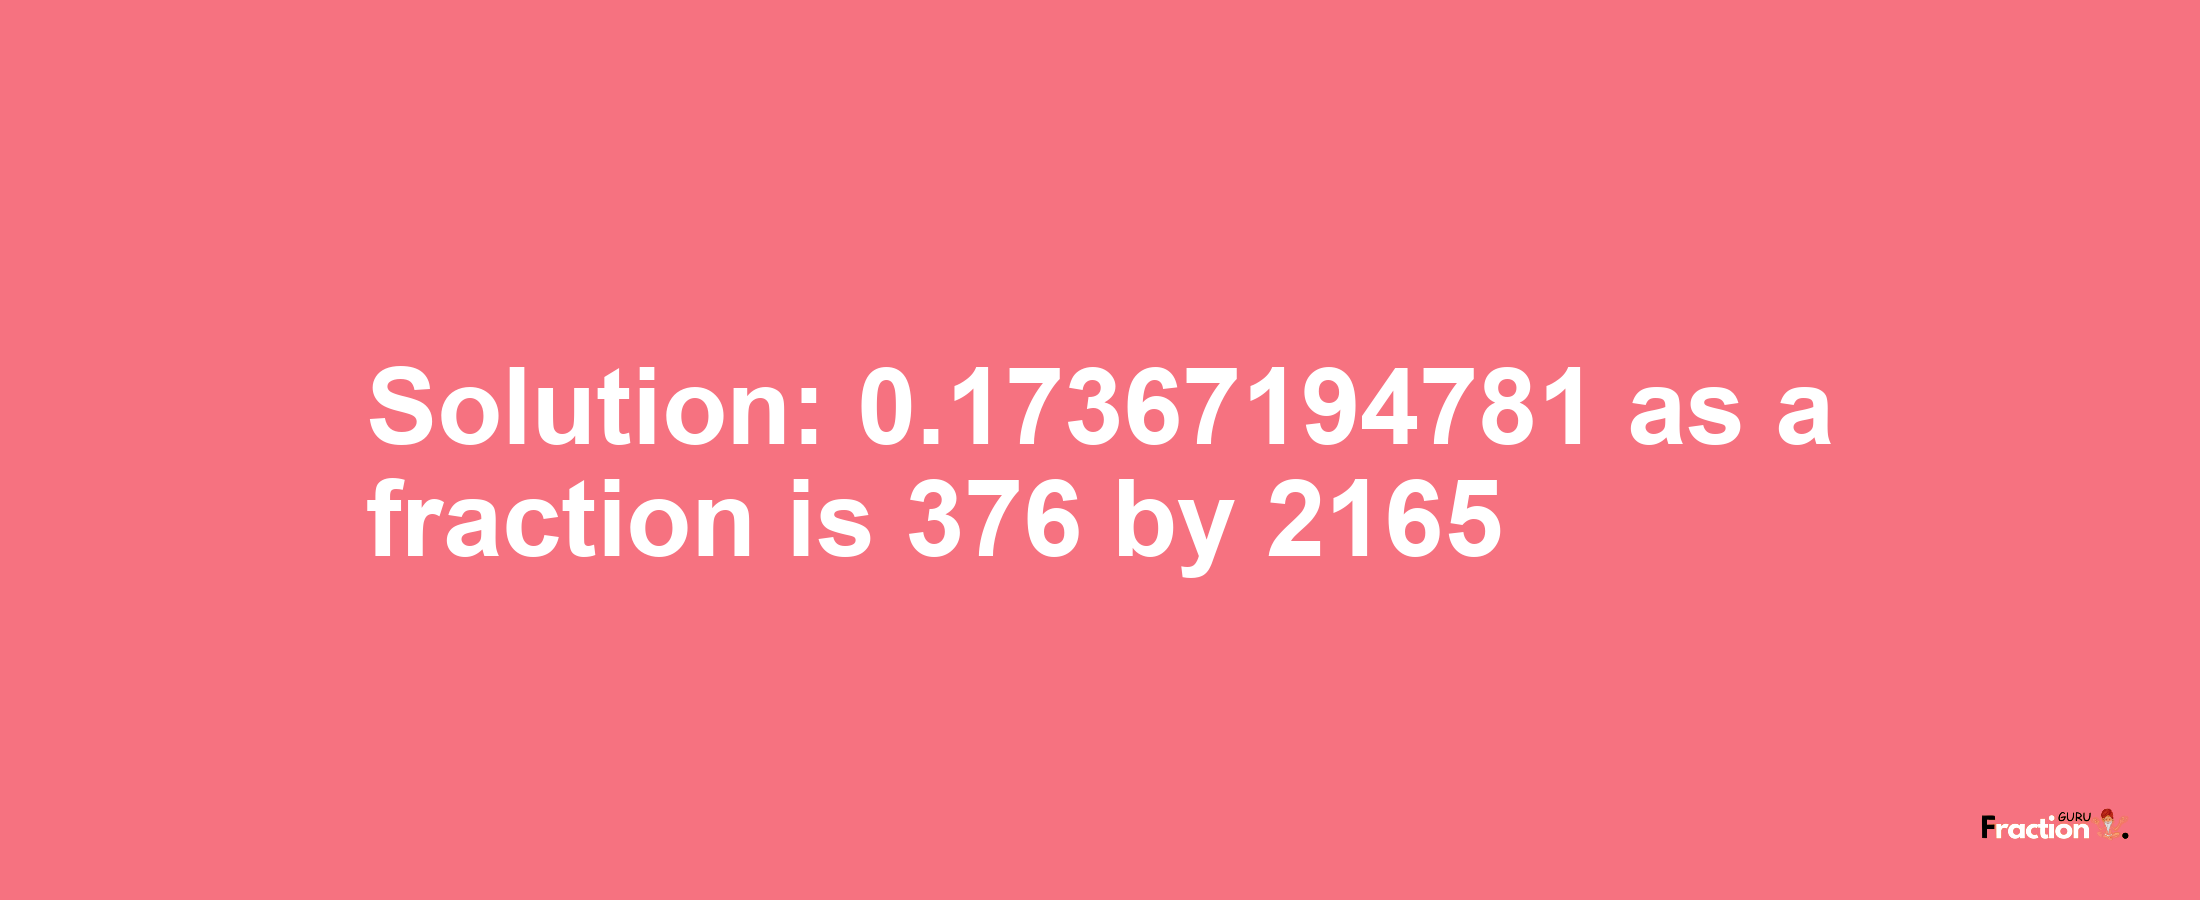 Solution:0.17367194781 as a fraction is 376/2165